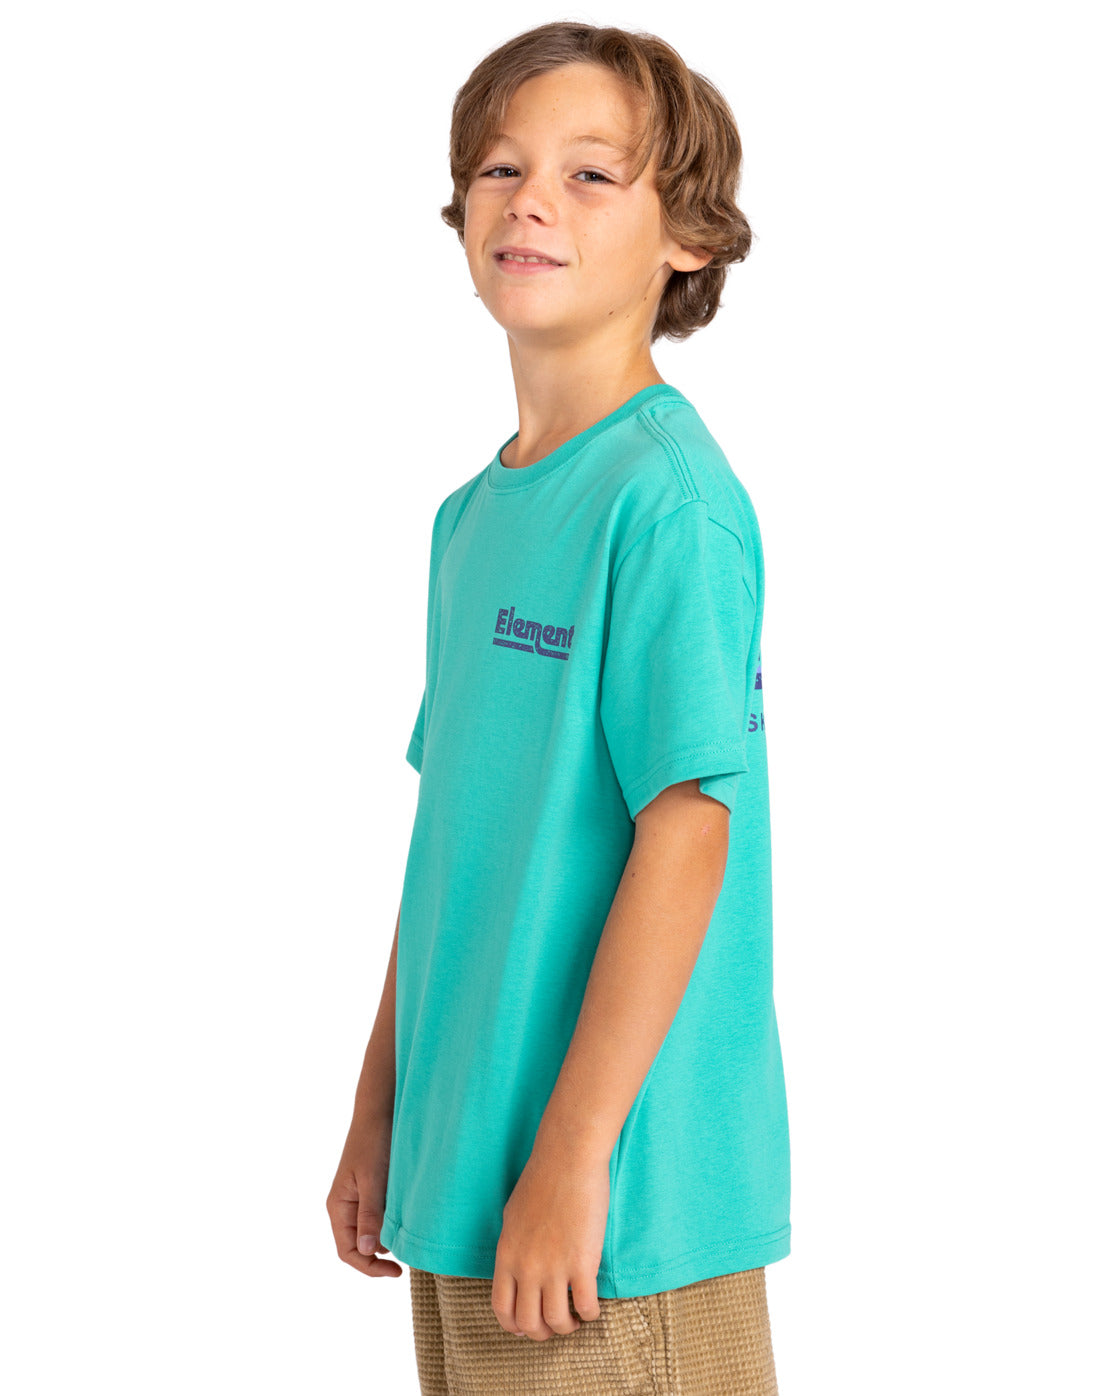 ELEMENT - SUNUP SS YOUTH TEE - LAGOON